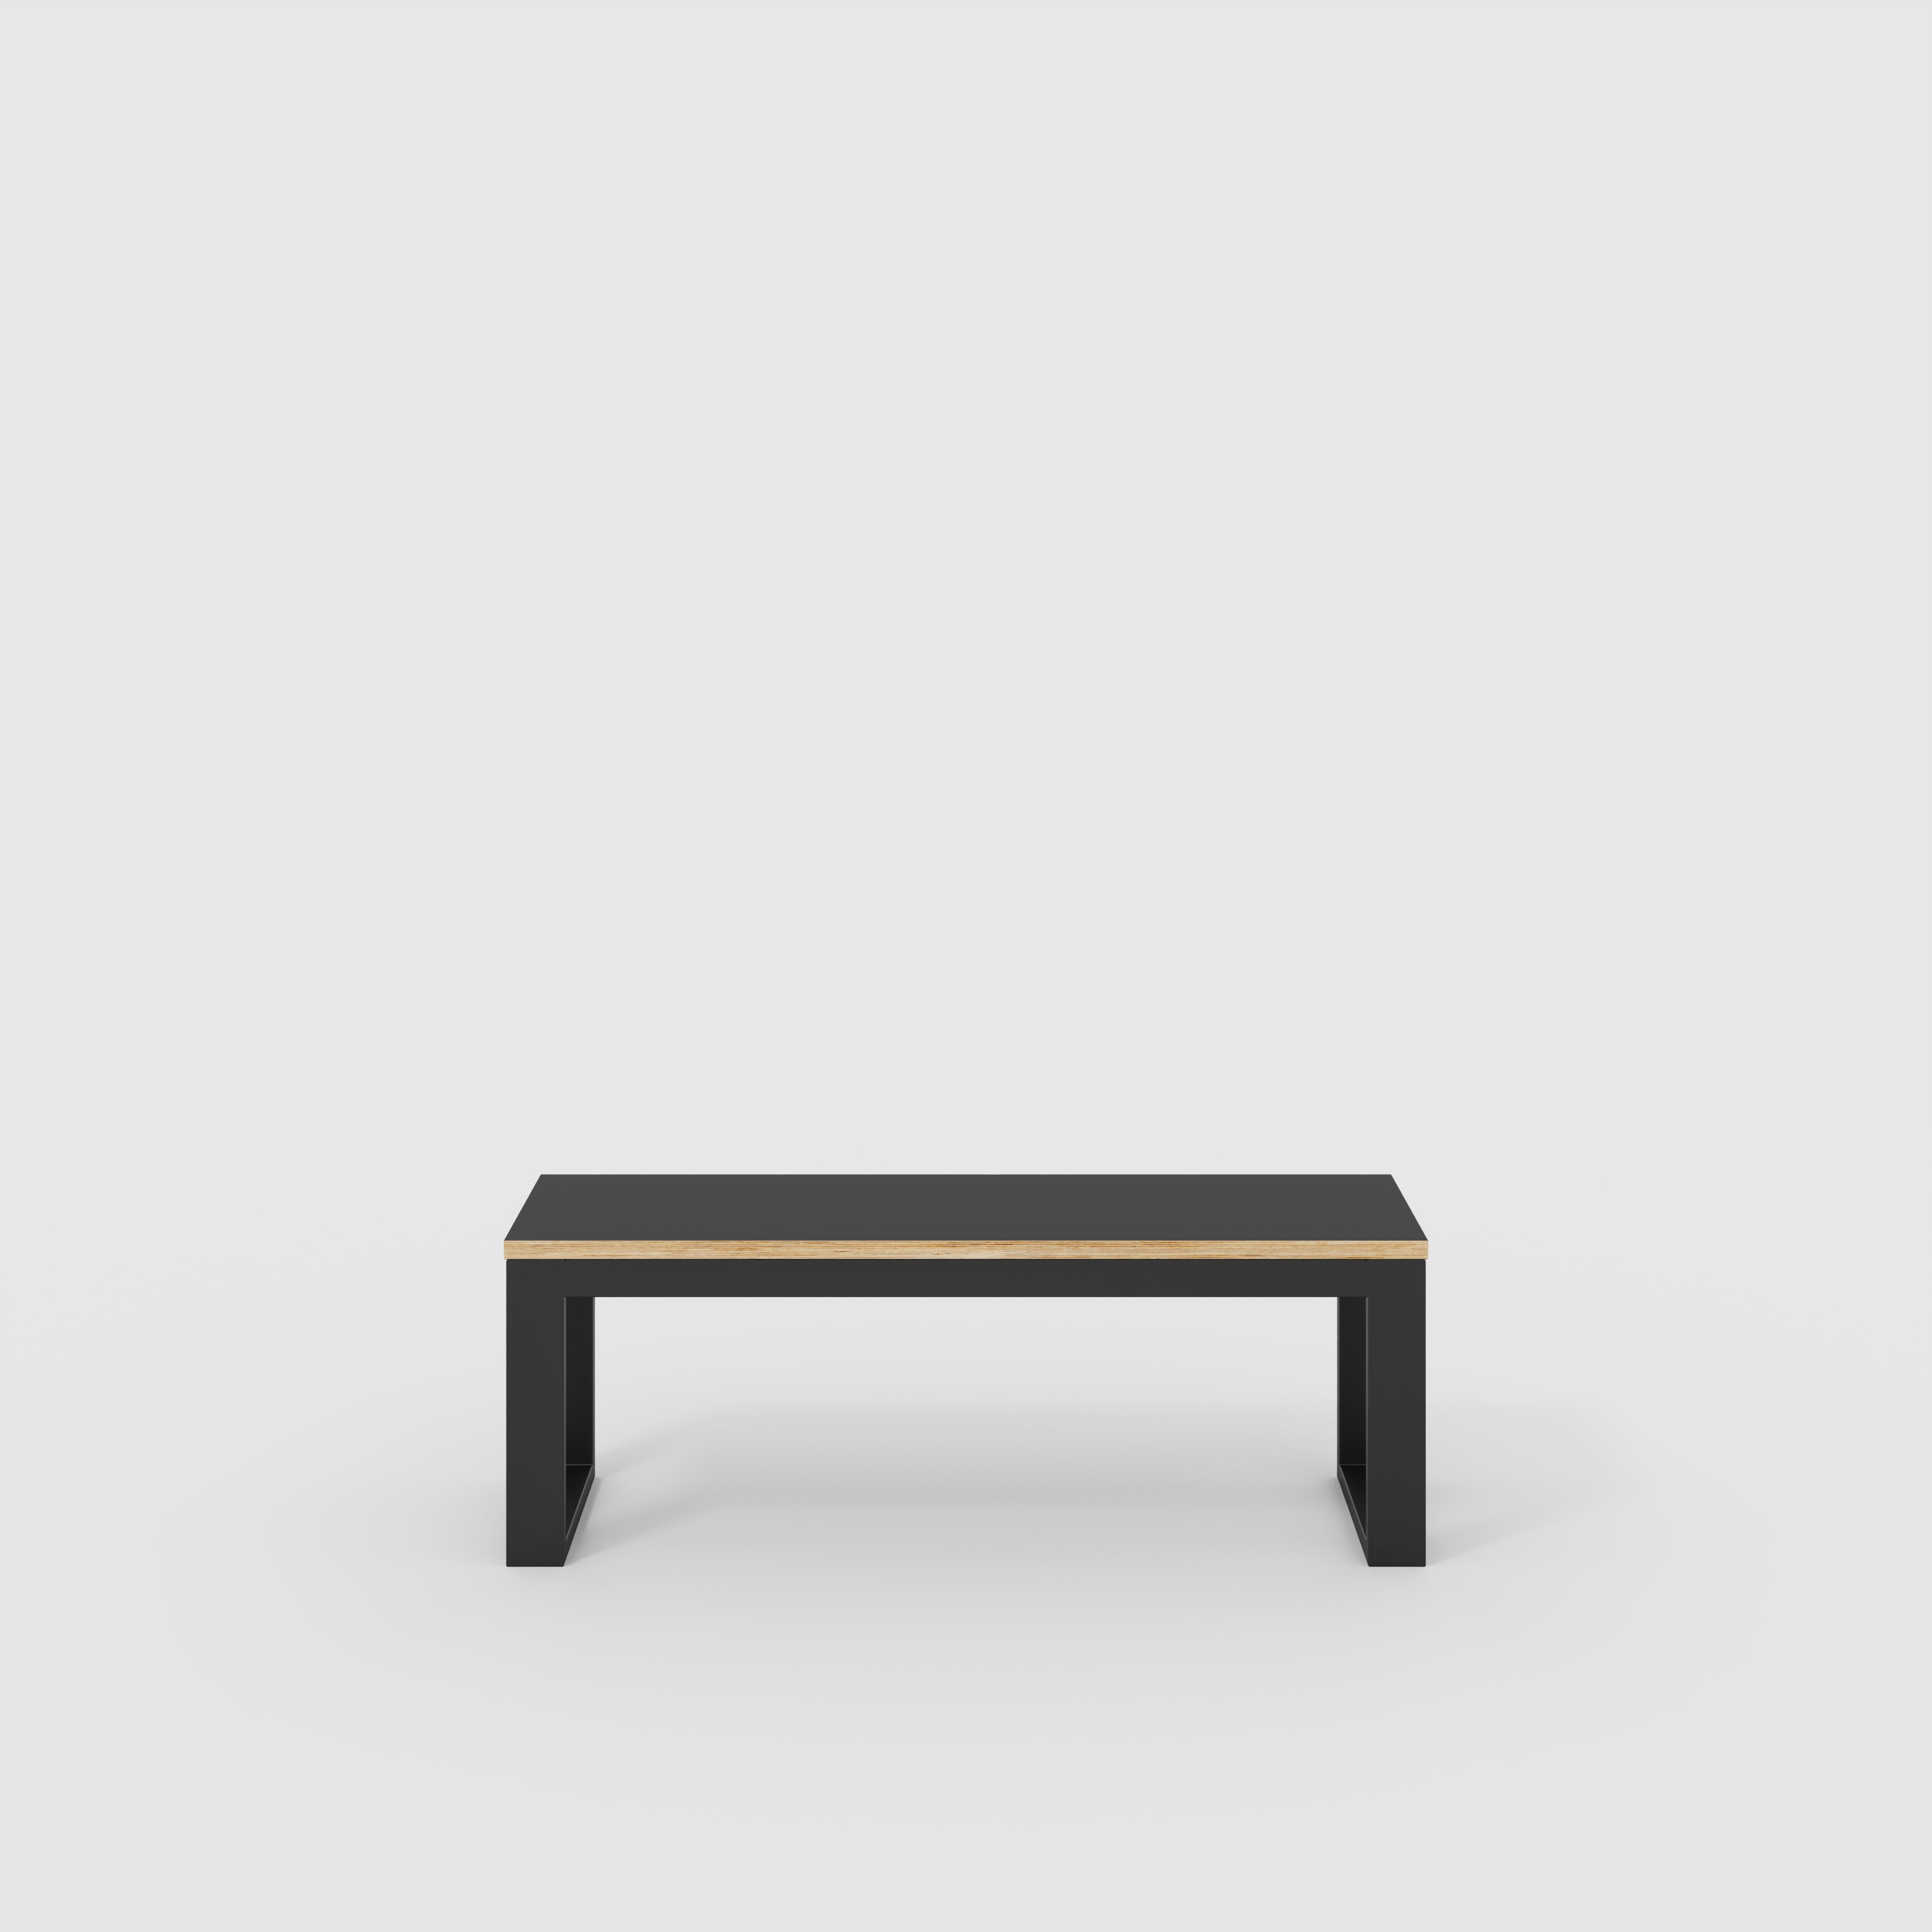 Bench Seat with Black Industrial Frame - Formica Diamond Black - 1200(w) x 325(d)